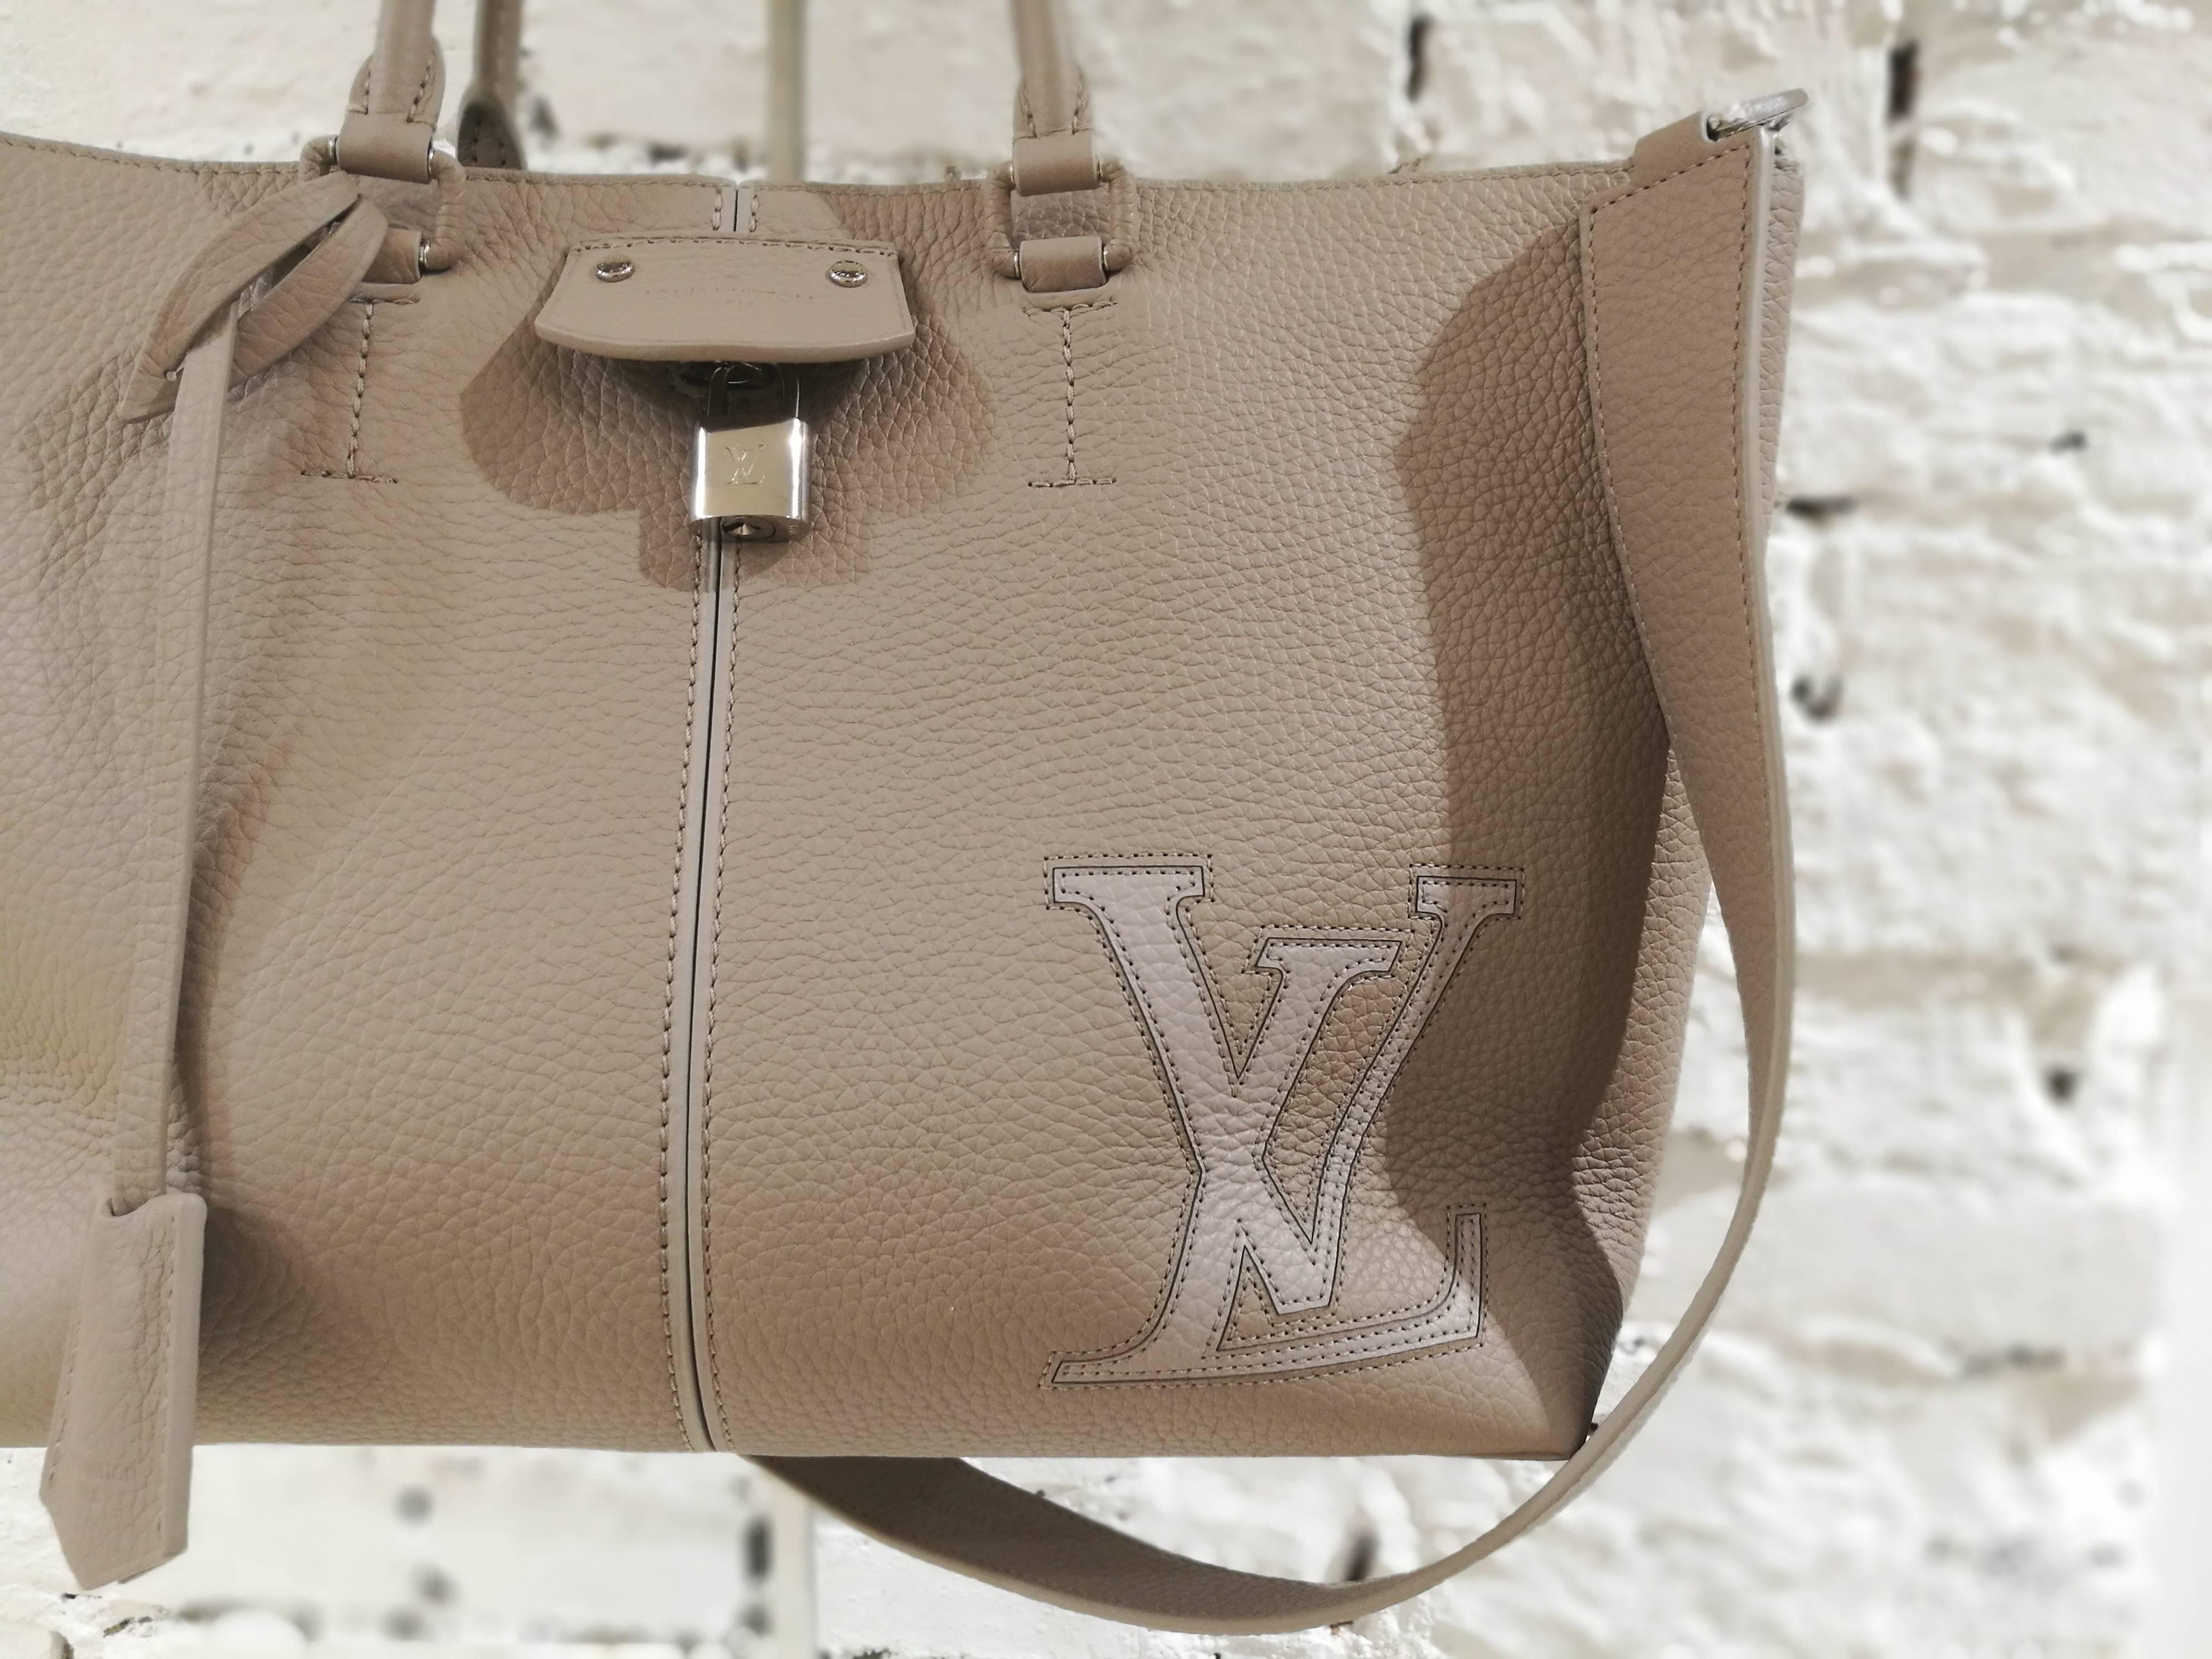 An elegant, feminine tote with soft, rounded lines and generous capacity, the new Pernelle is made of rich Taurillon leather. Its refined craftsmanship is enhanced with luxurious details: note the LV signature, inspired by images from the House